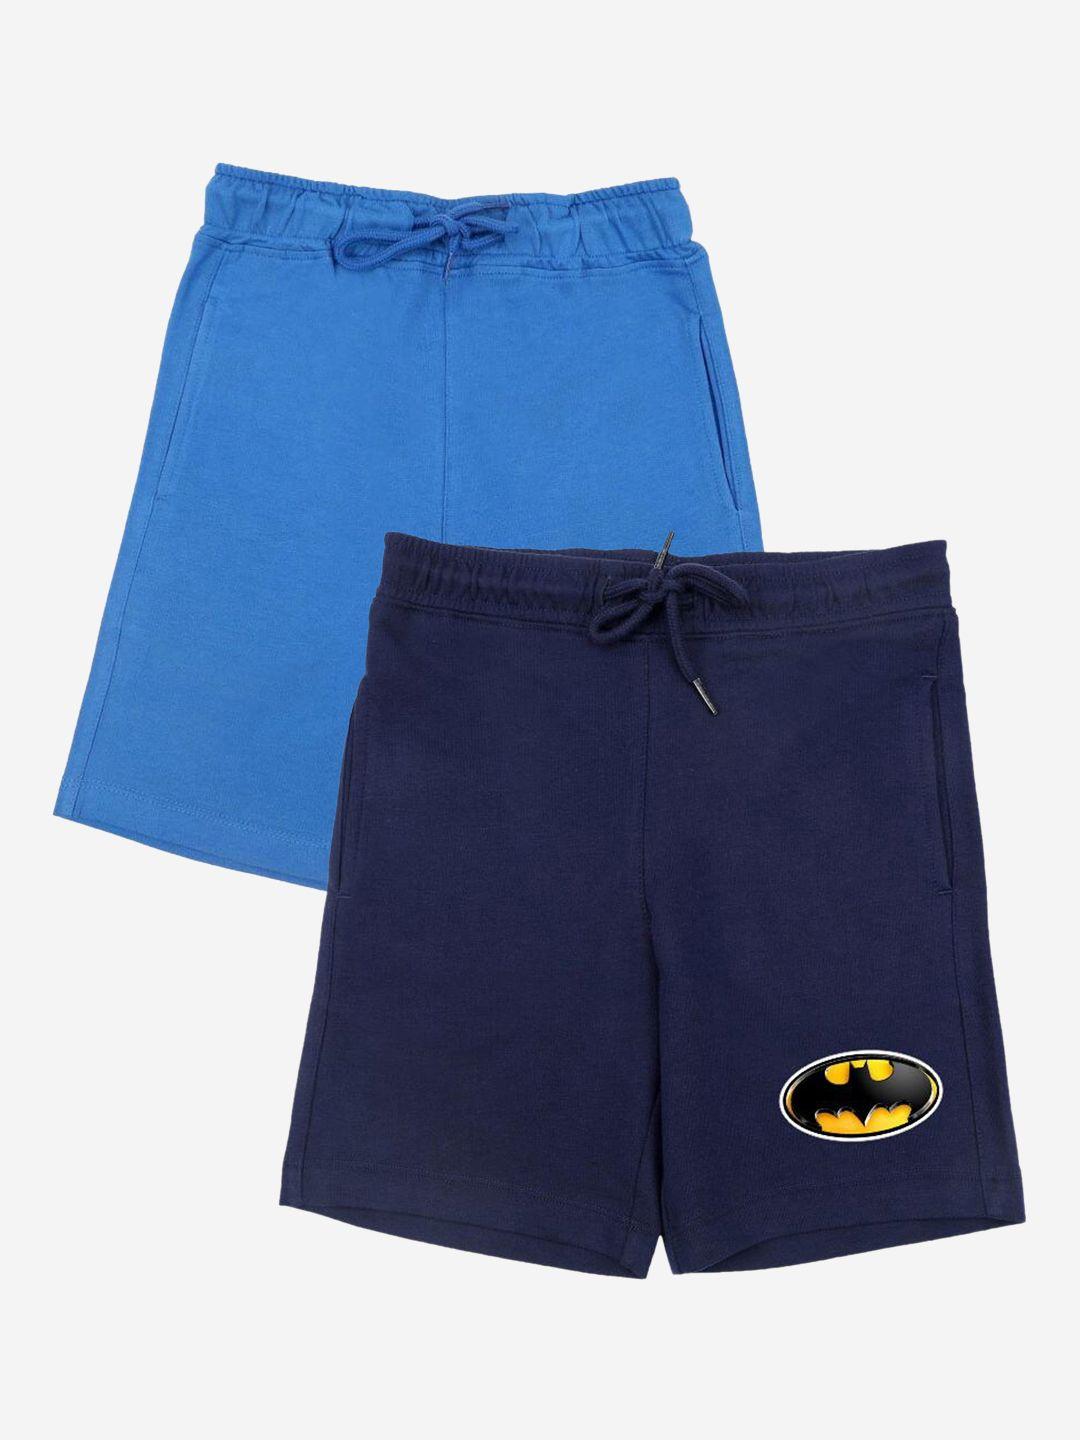 yk justice league boys pack of 2 blue & yellow batman printed regular fit sports shorts